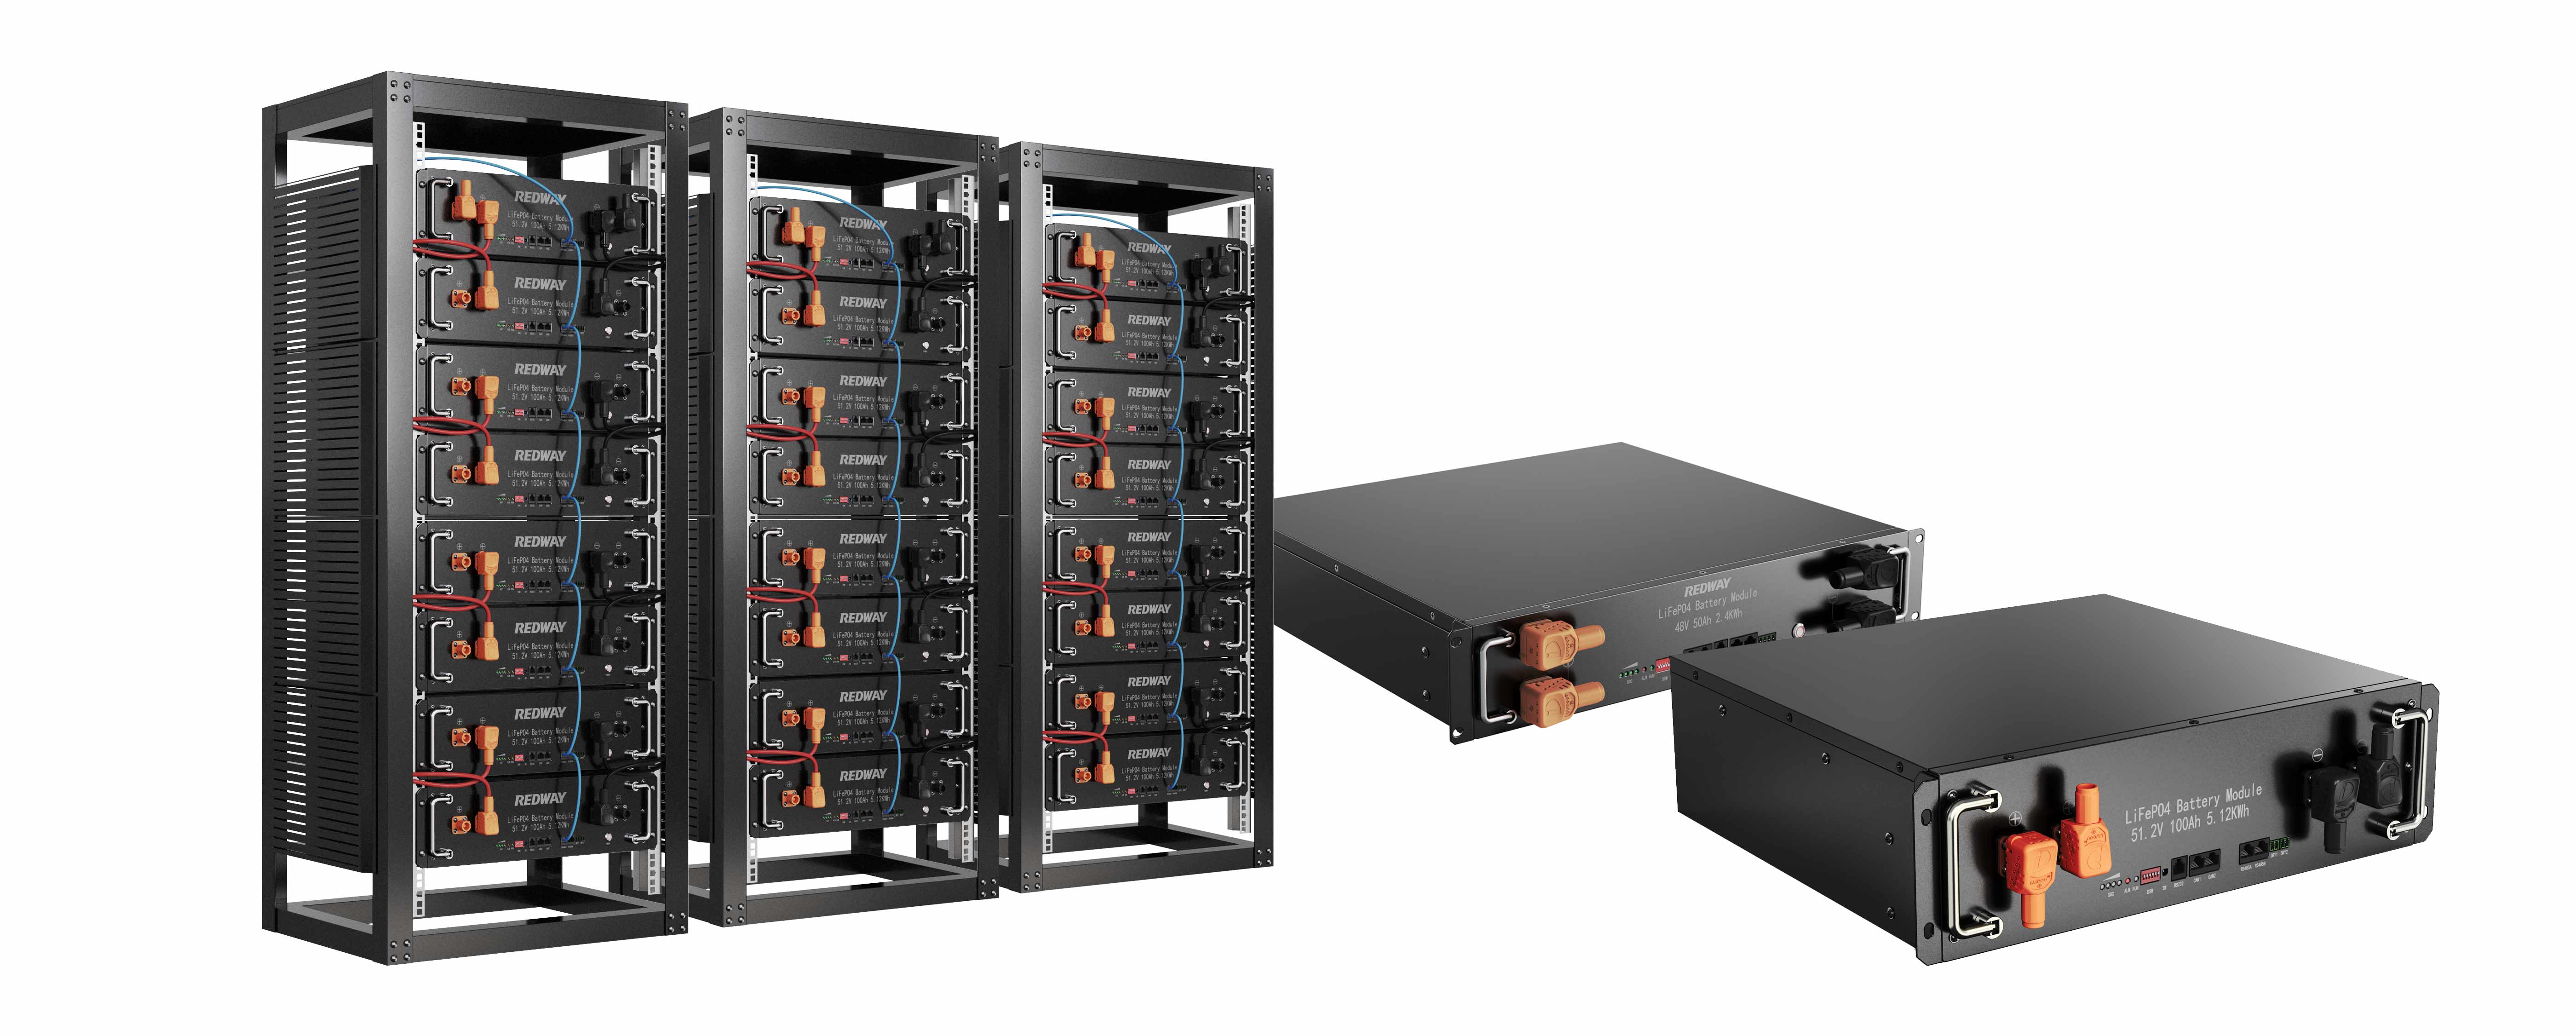 Wholesale 48V 100Ah Server Rack Battery in US Makes Redway Stand Out in the LiFePO Battery Industry